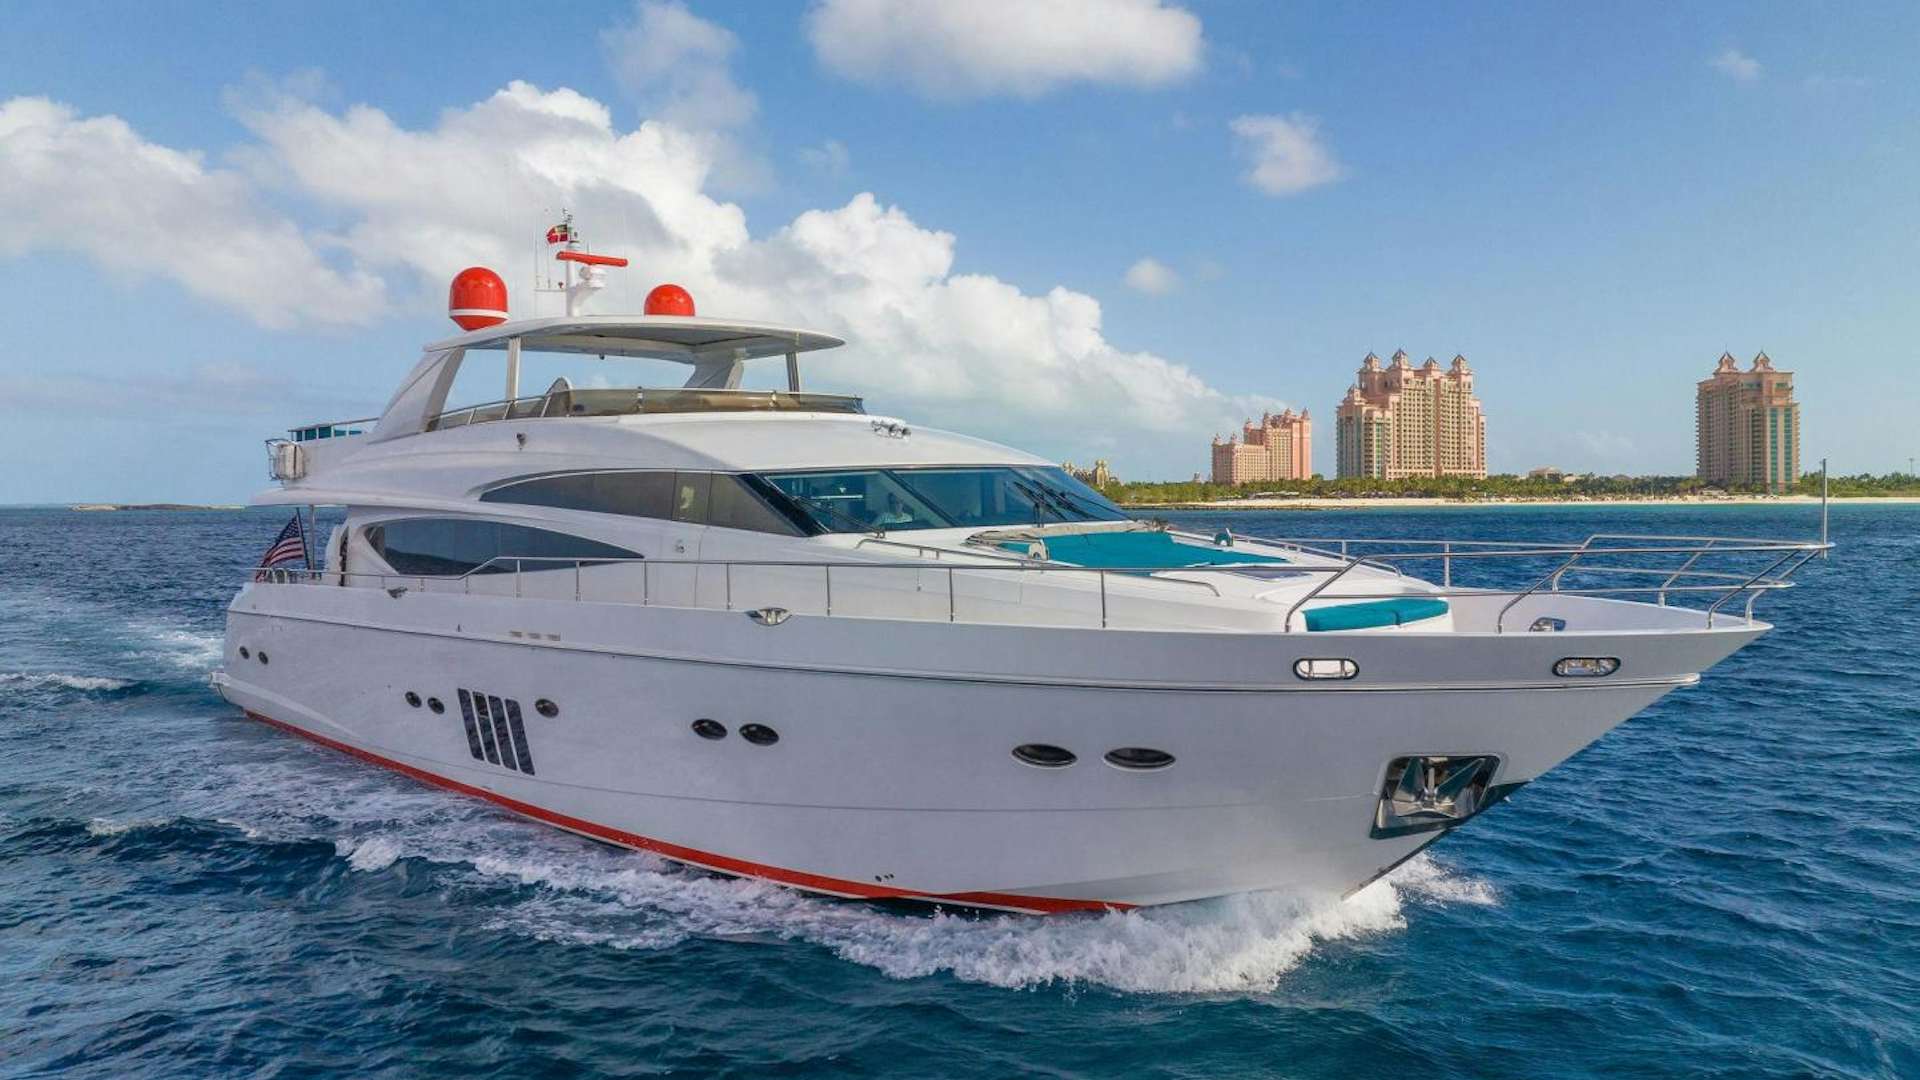 21 sea sands
Yacht for Sale